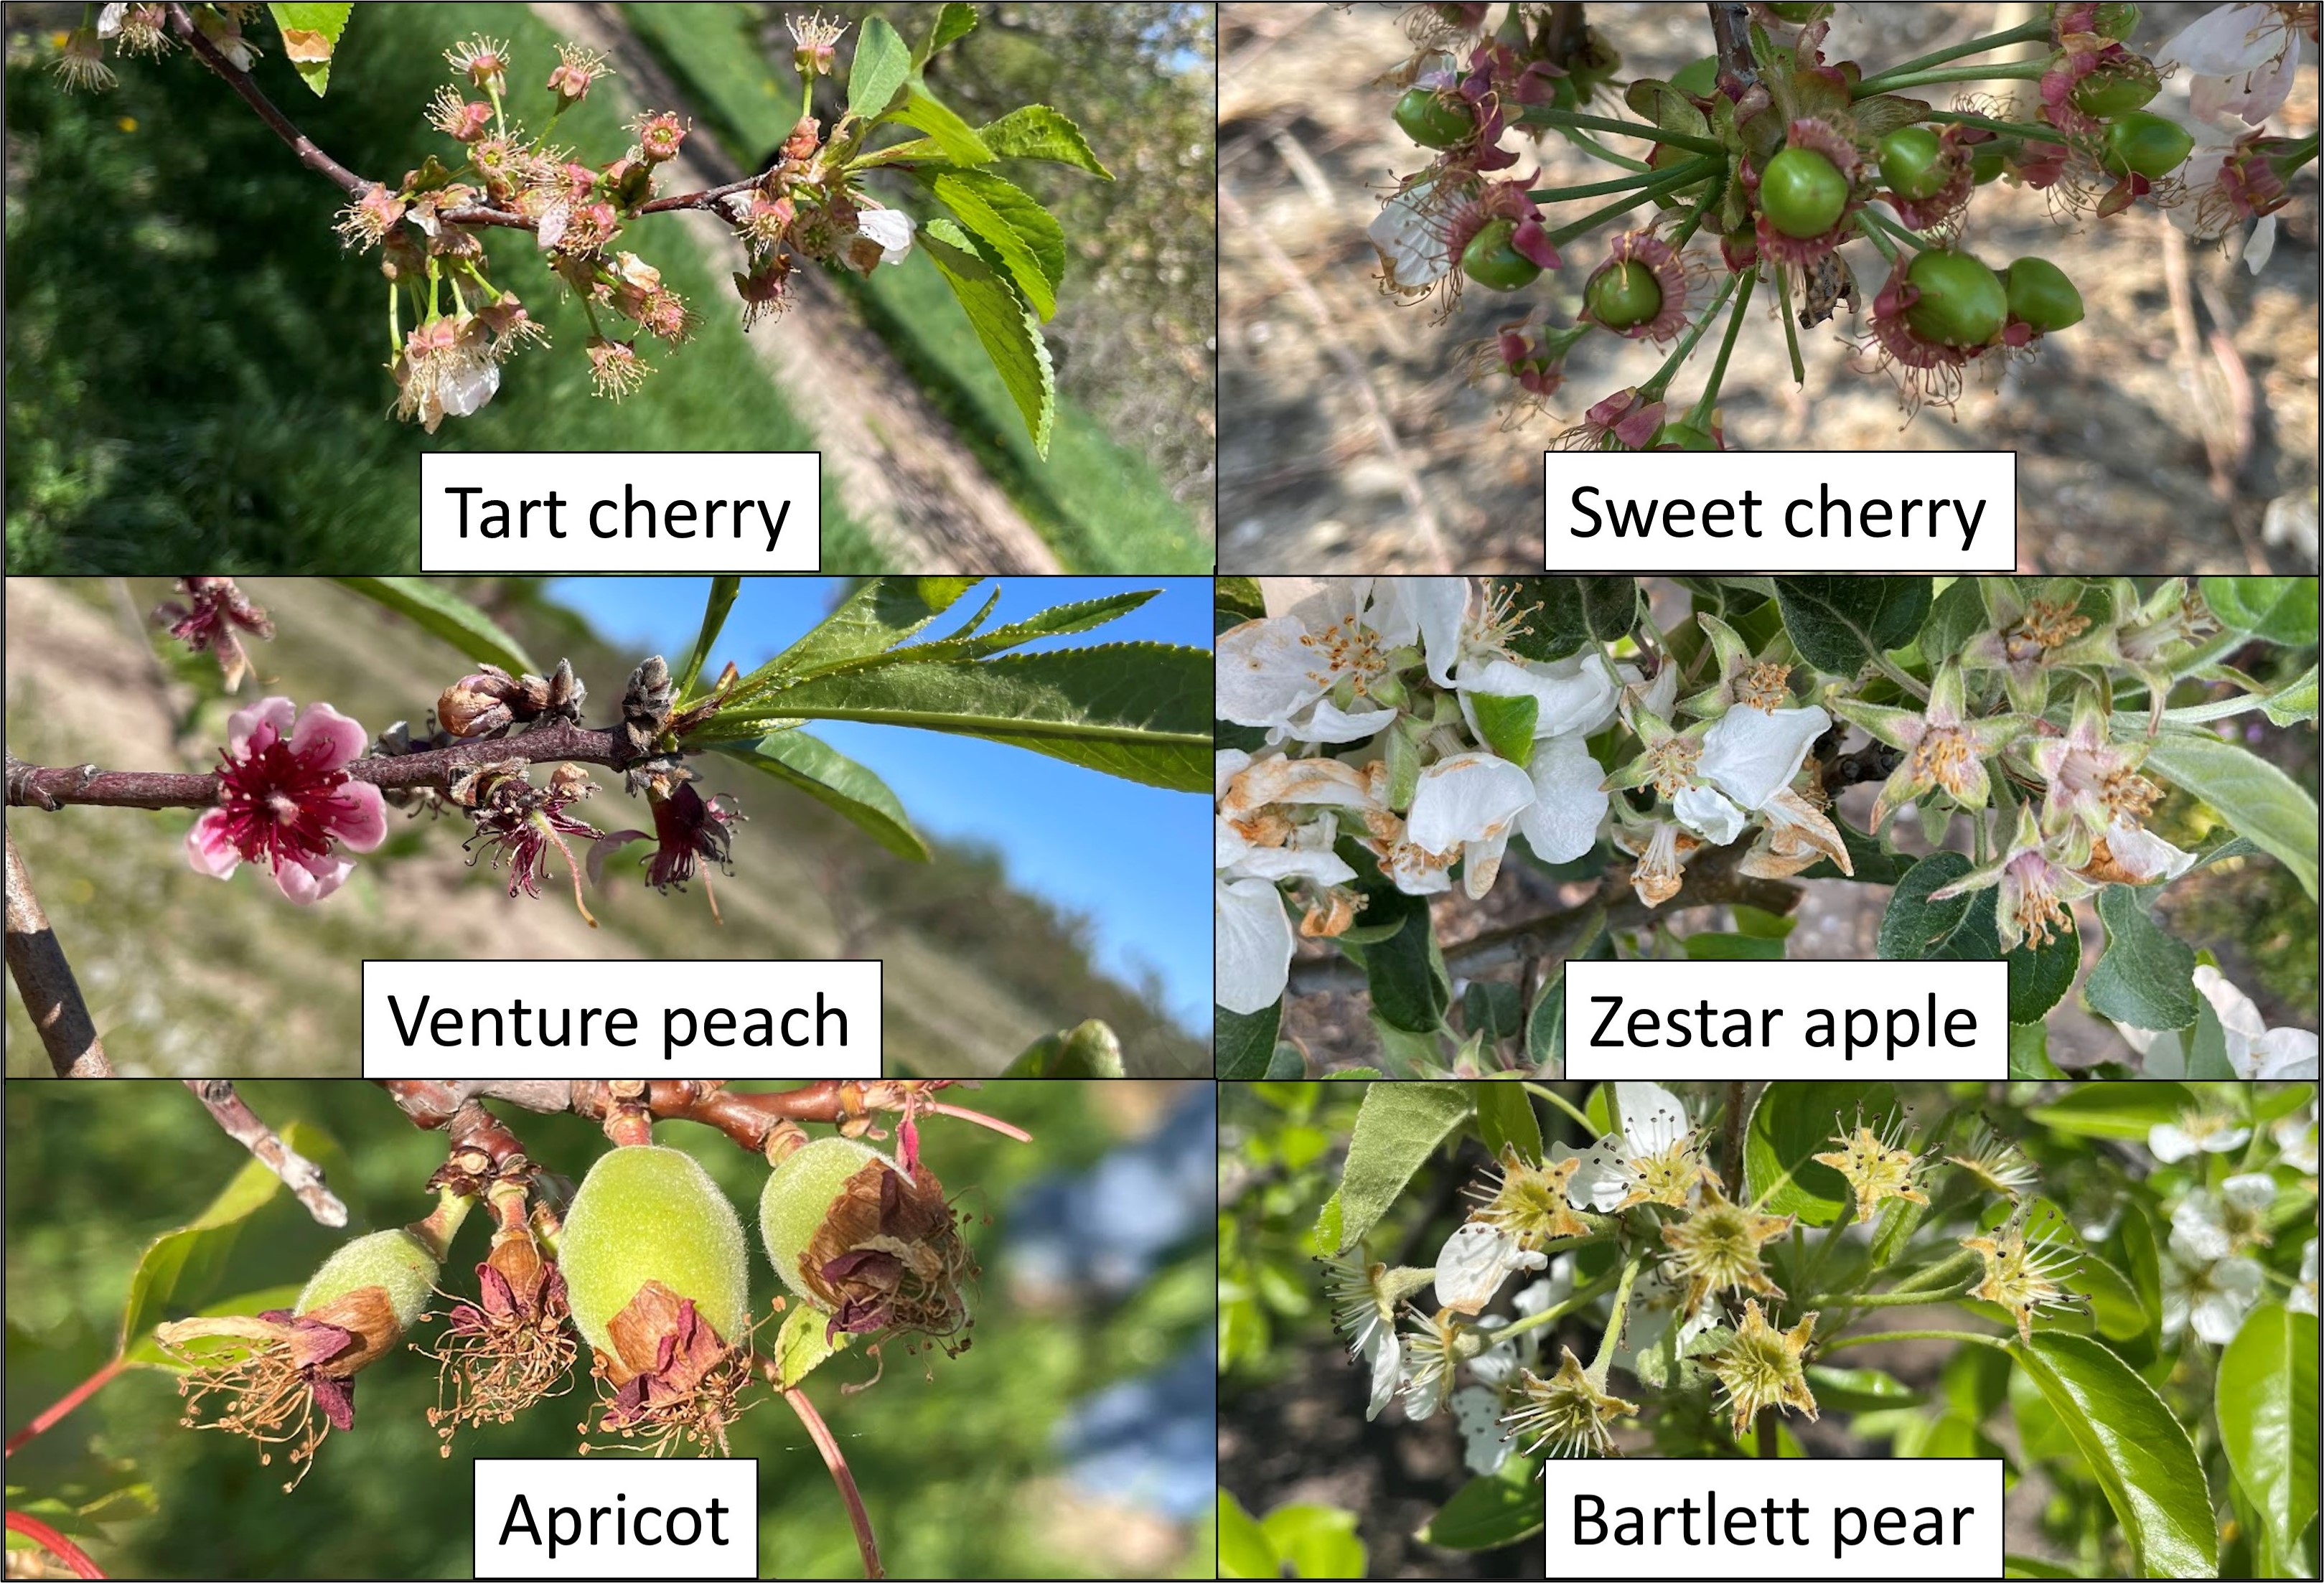 Stage of tree phenology for tart cherry, sweet cherry, peach, apple, apricot, and pear.